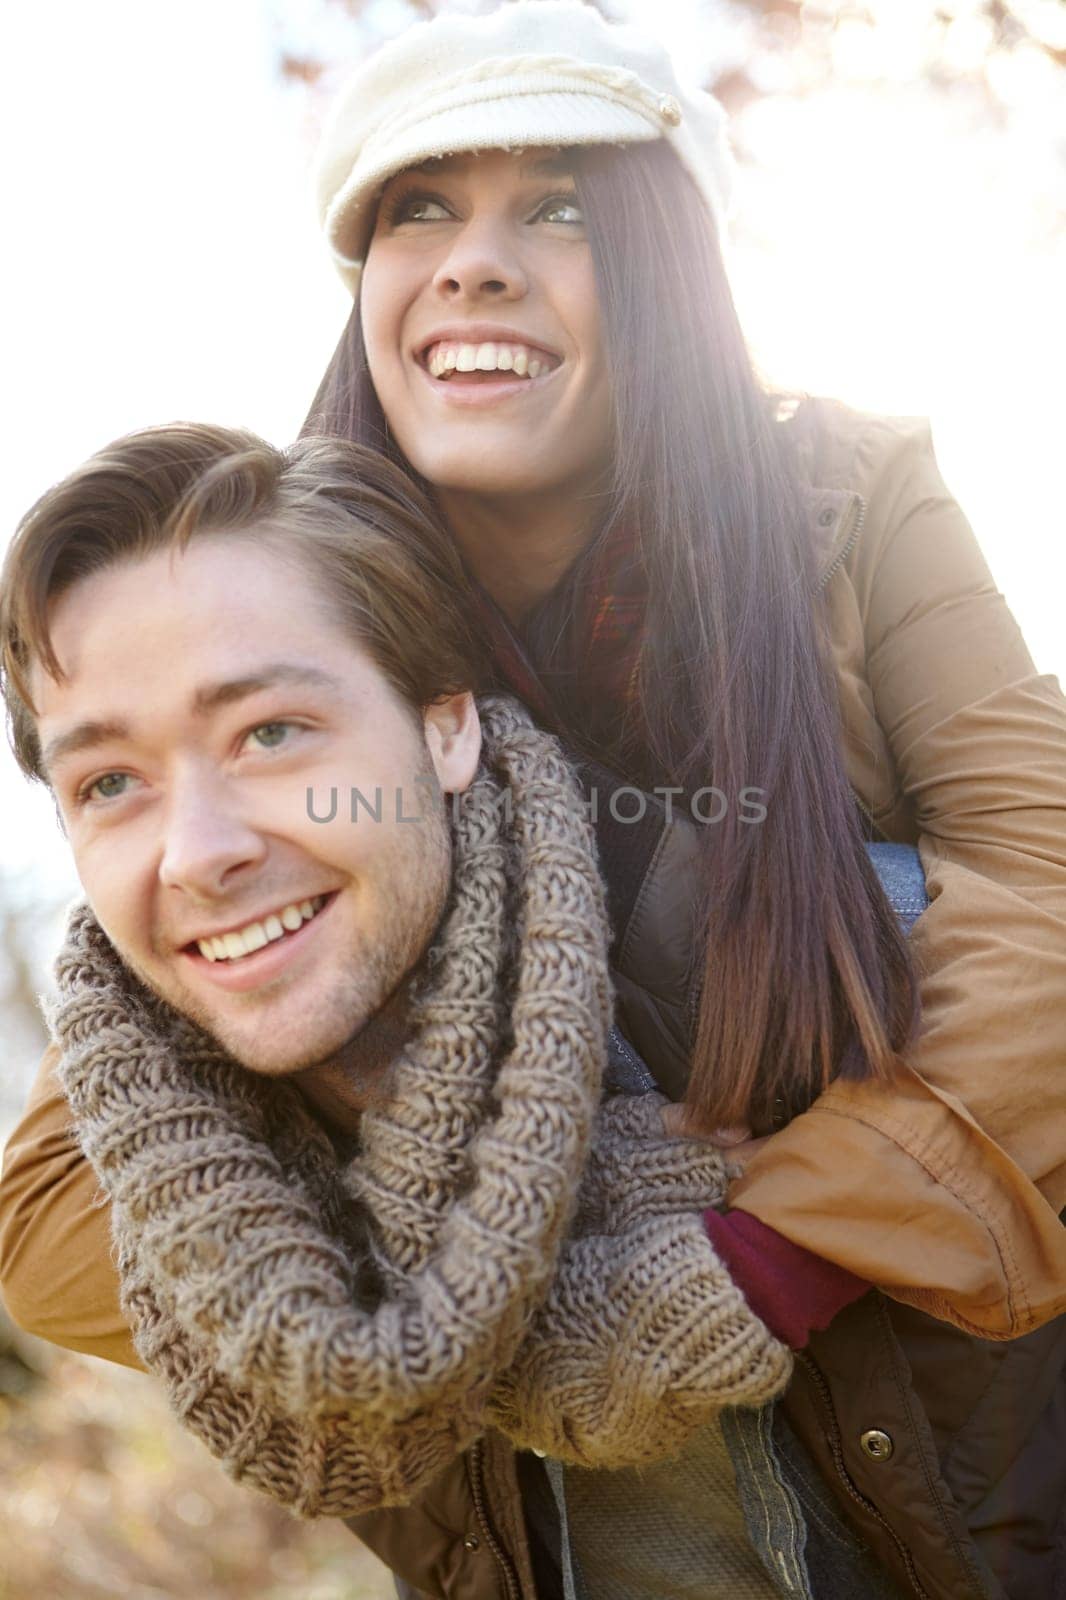 Having fun together. A young man piggybacking his girlfriend while outdoors in the woods